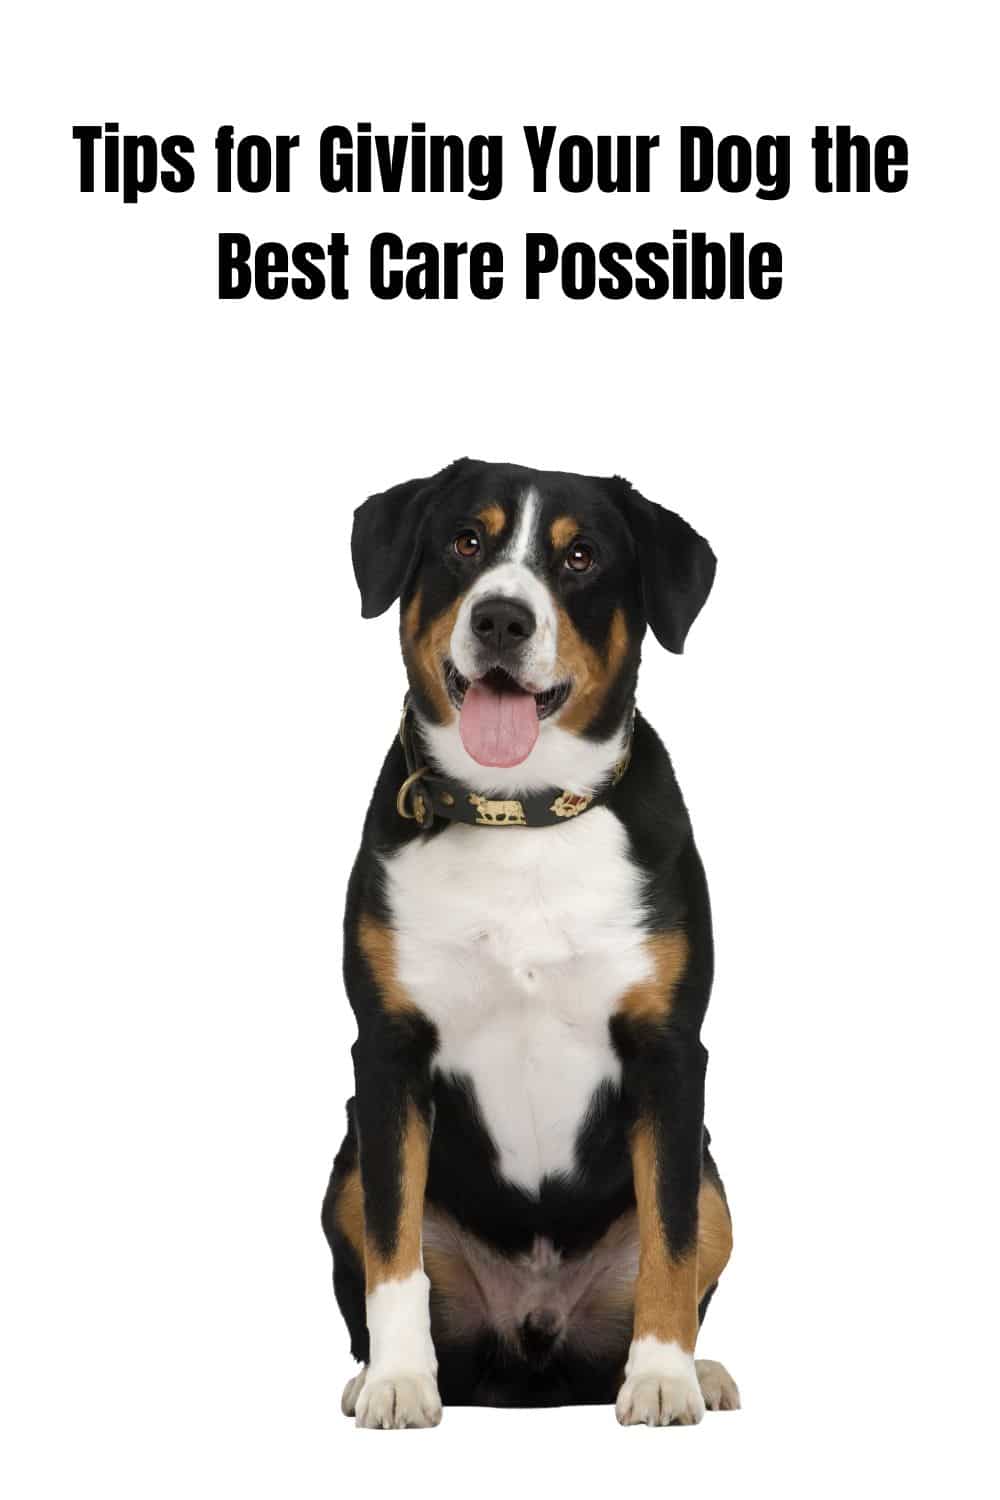 Giving Your Dog Best Care Possible